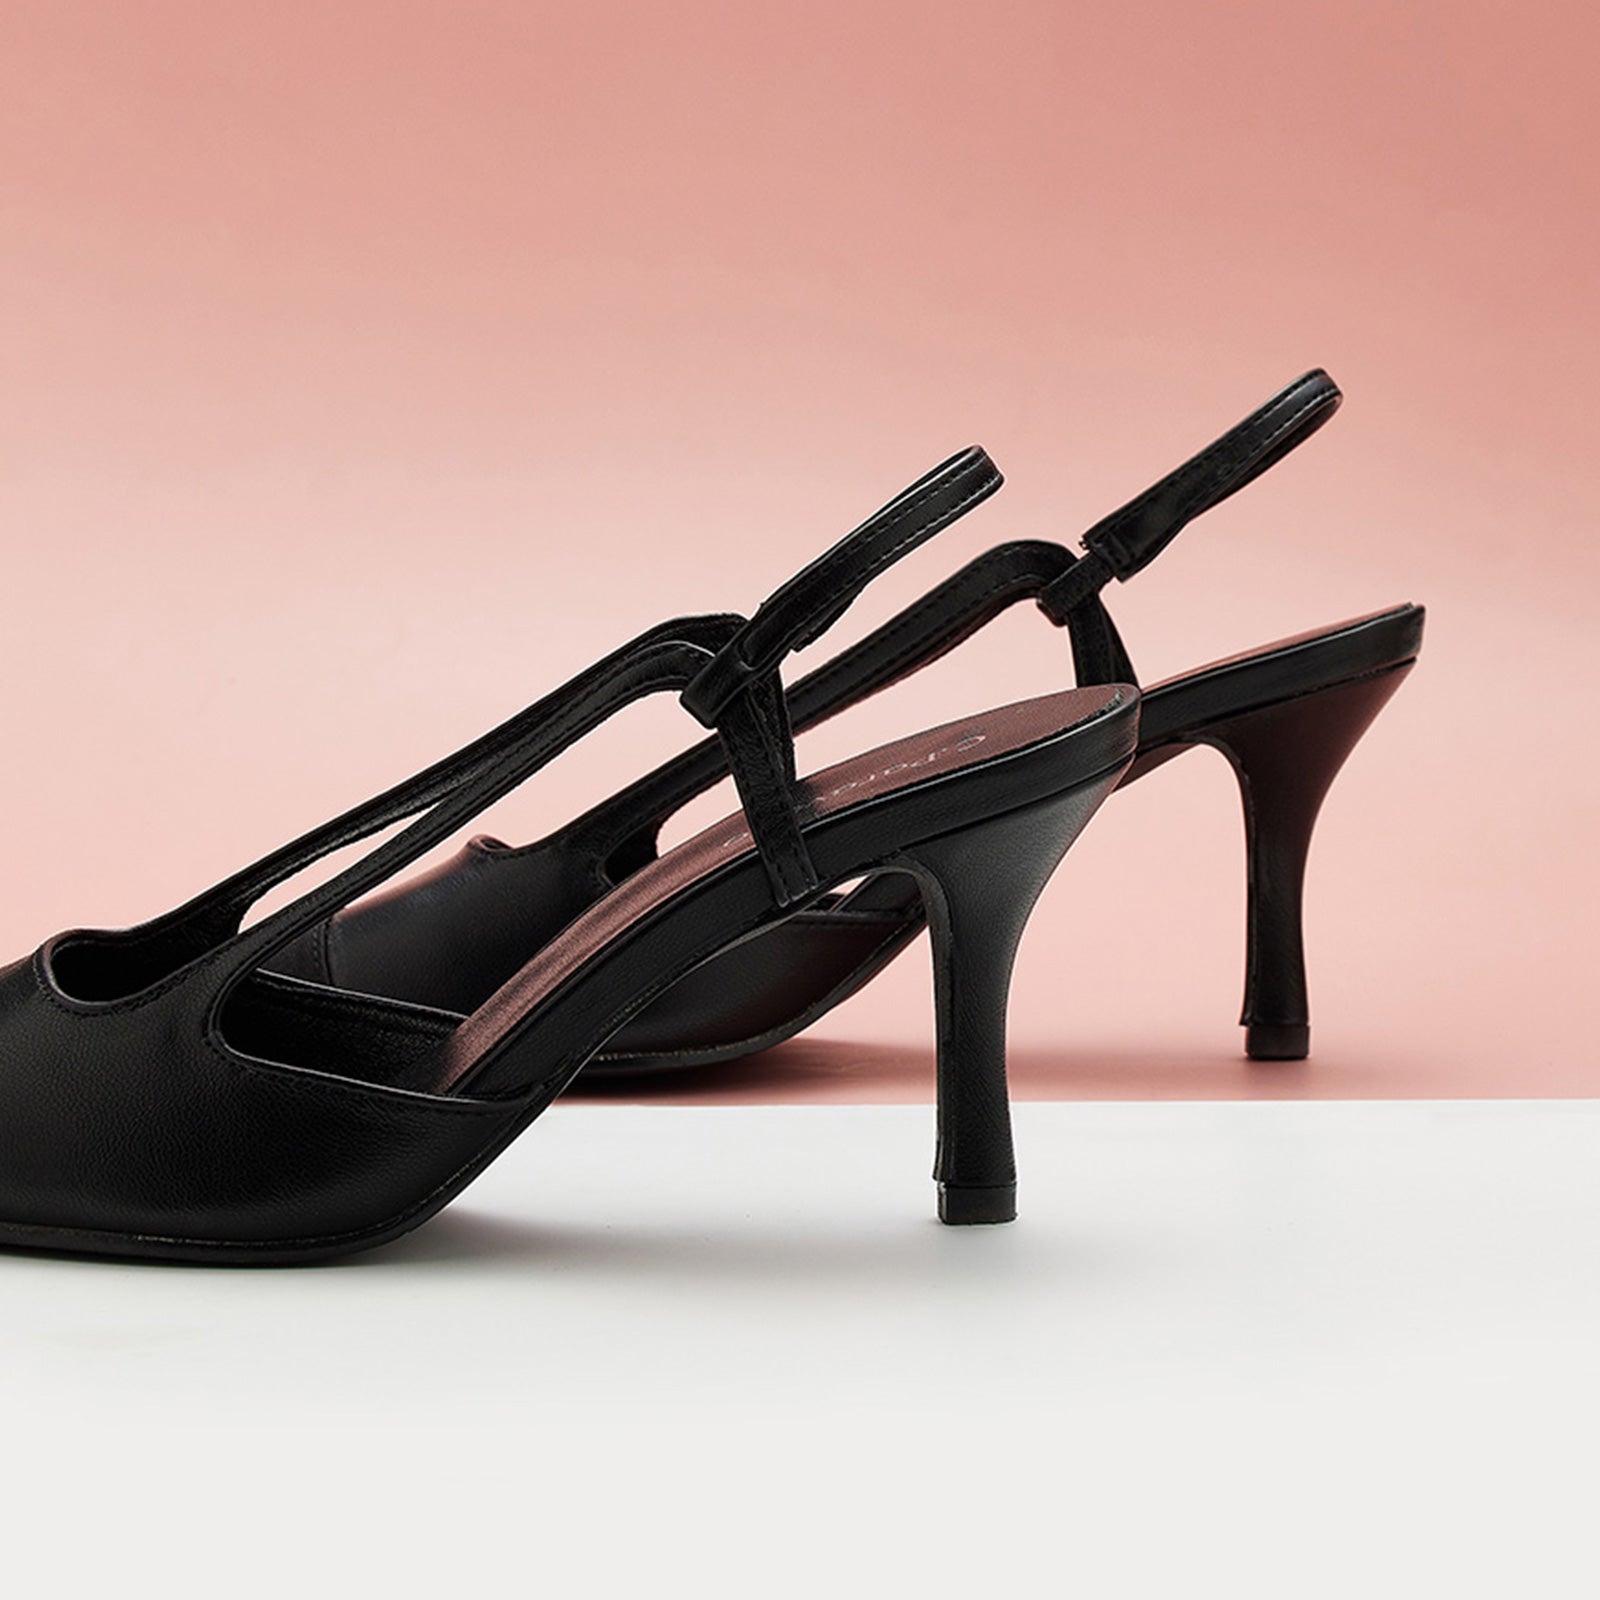 Pointed Toe Slingback Pumps in Black, a stylish and versatile choice for making a statement.